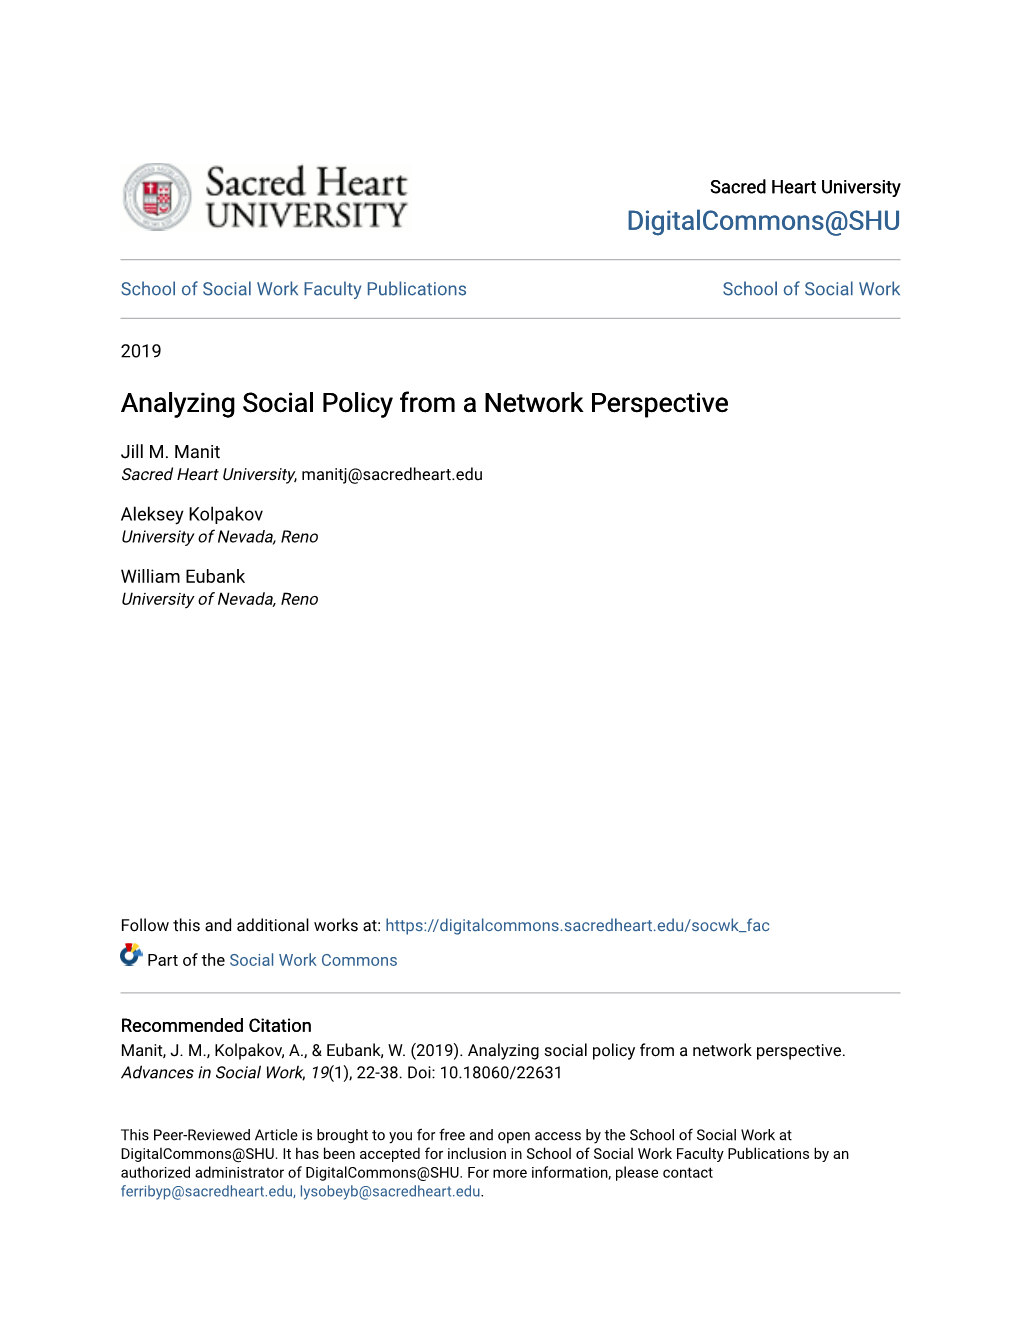 Analyzing Social Policy from a Network Perspective